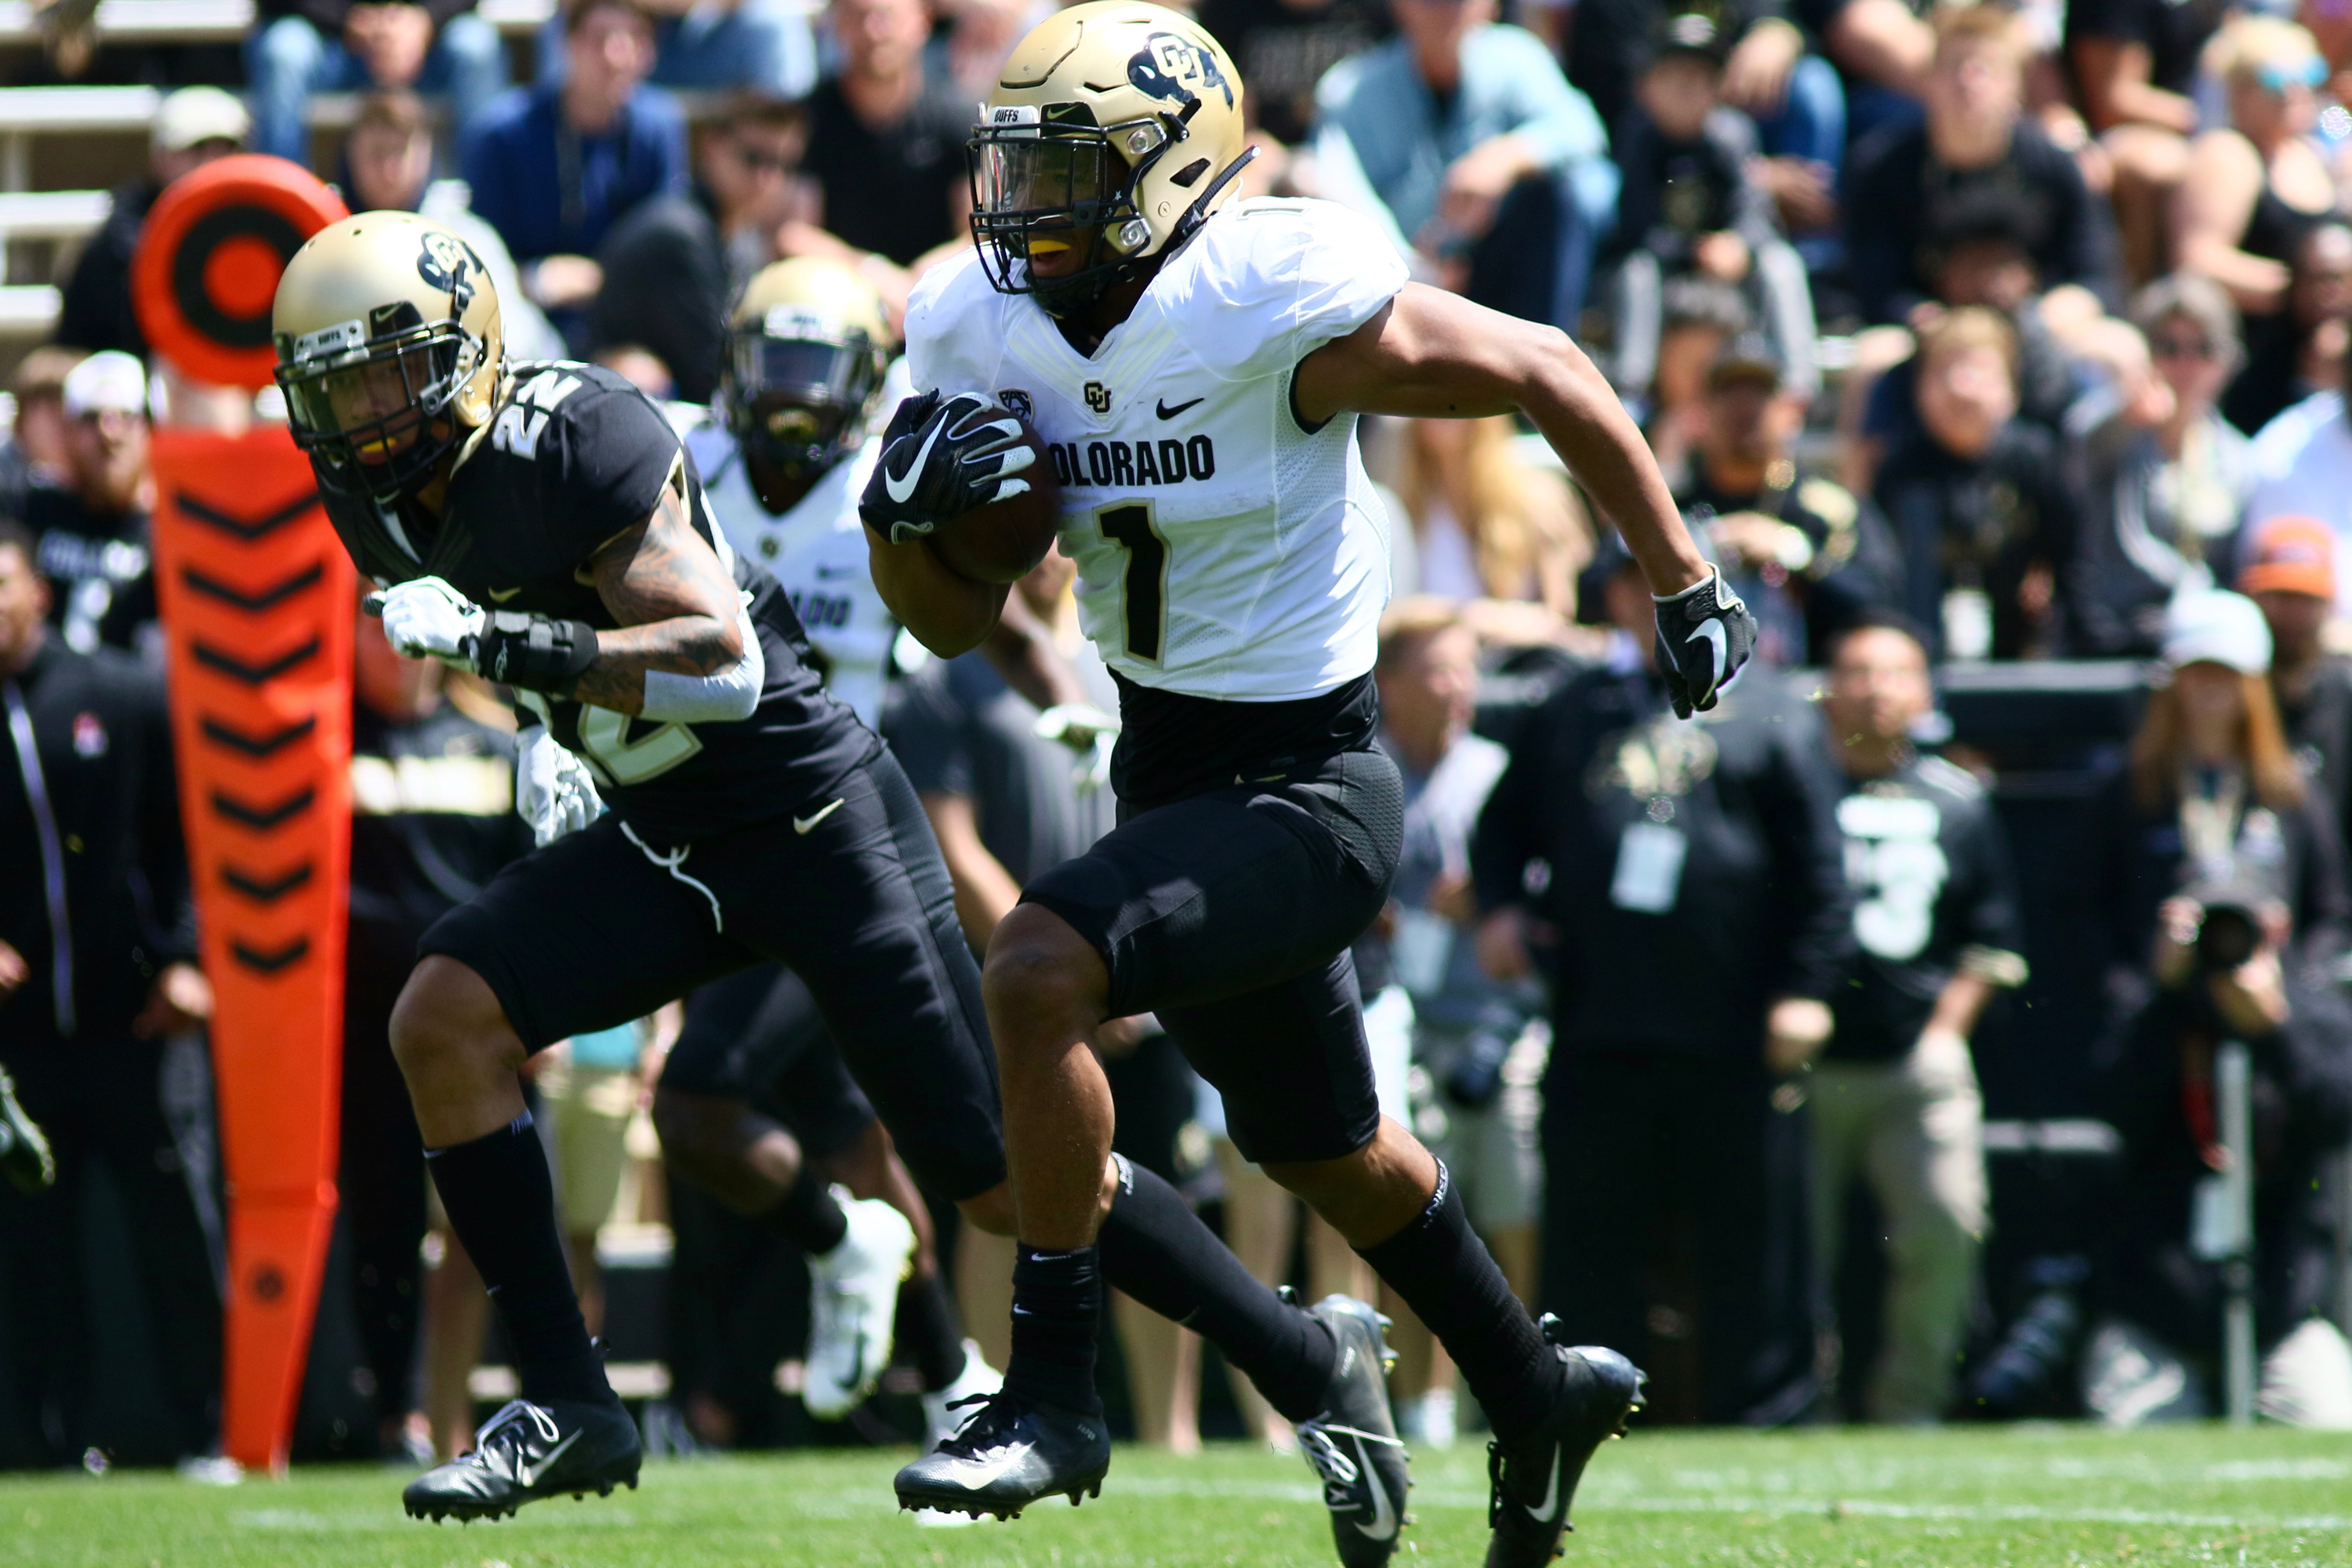 Team Gold prevails during CU’s annual Spring Game